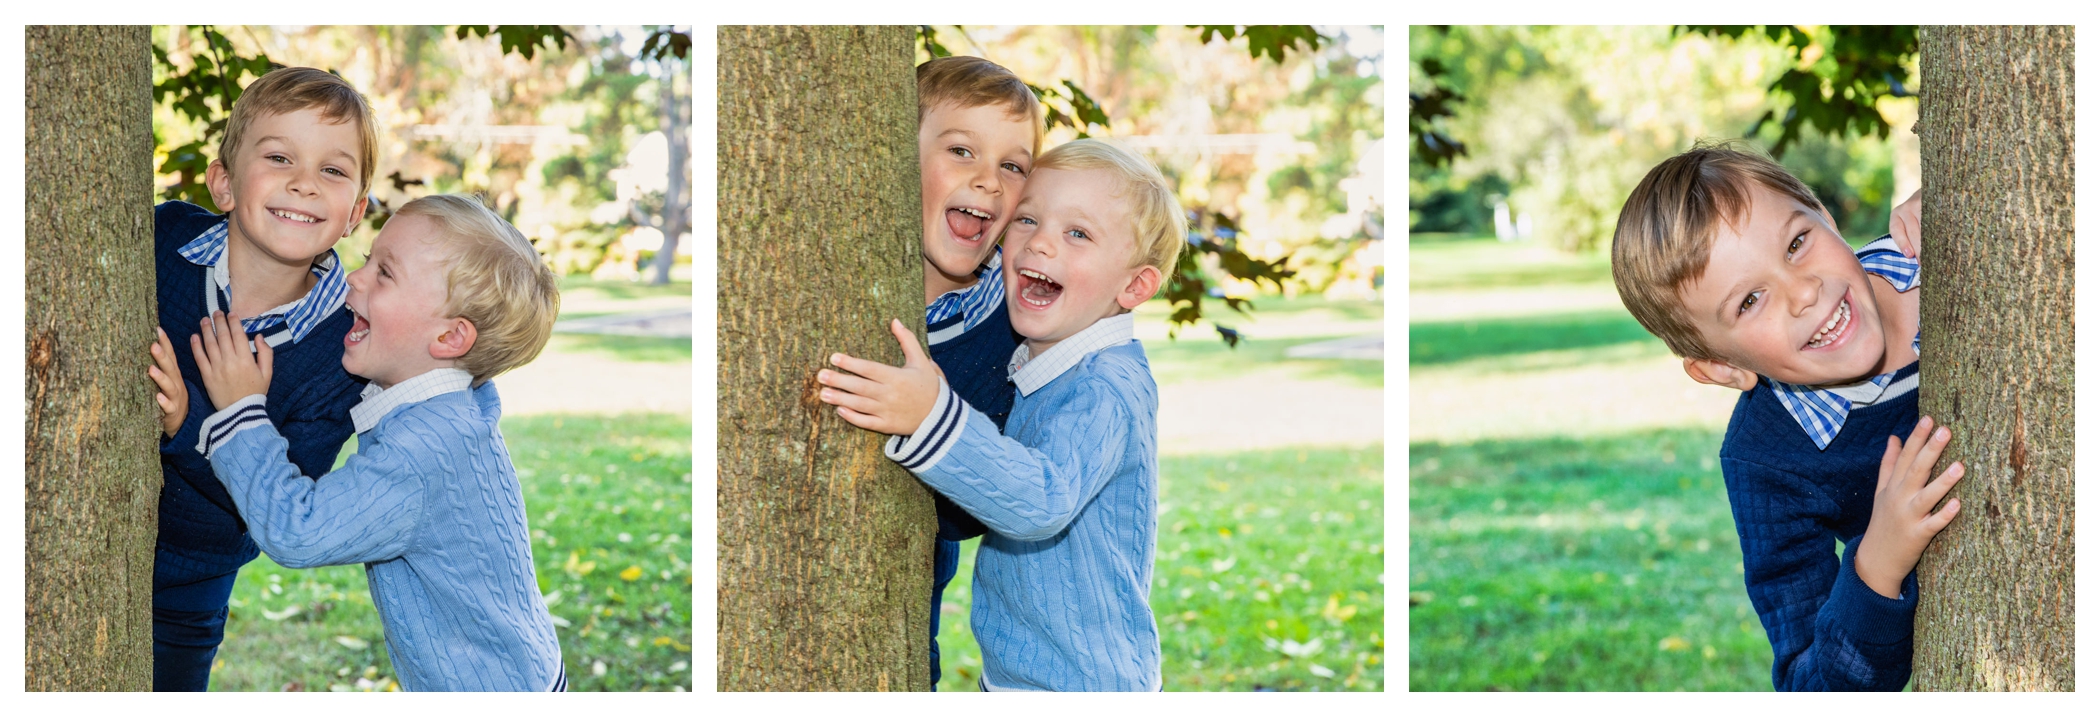 two boys playing hide and seek behind tree in oakville